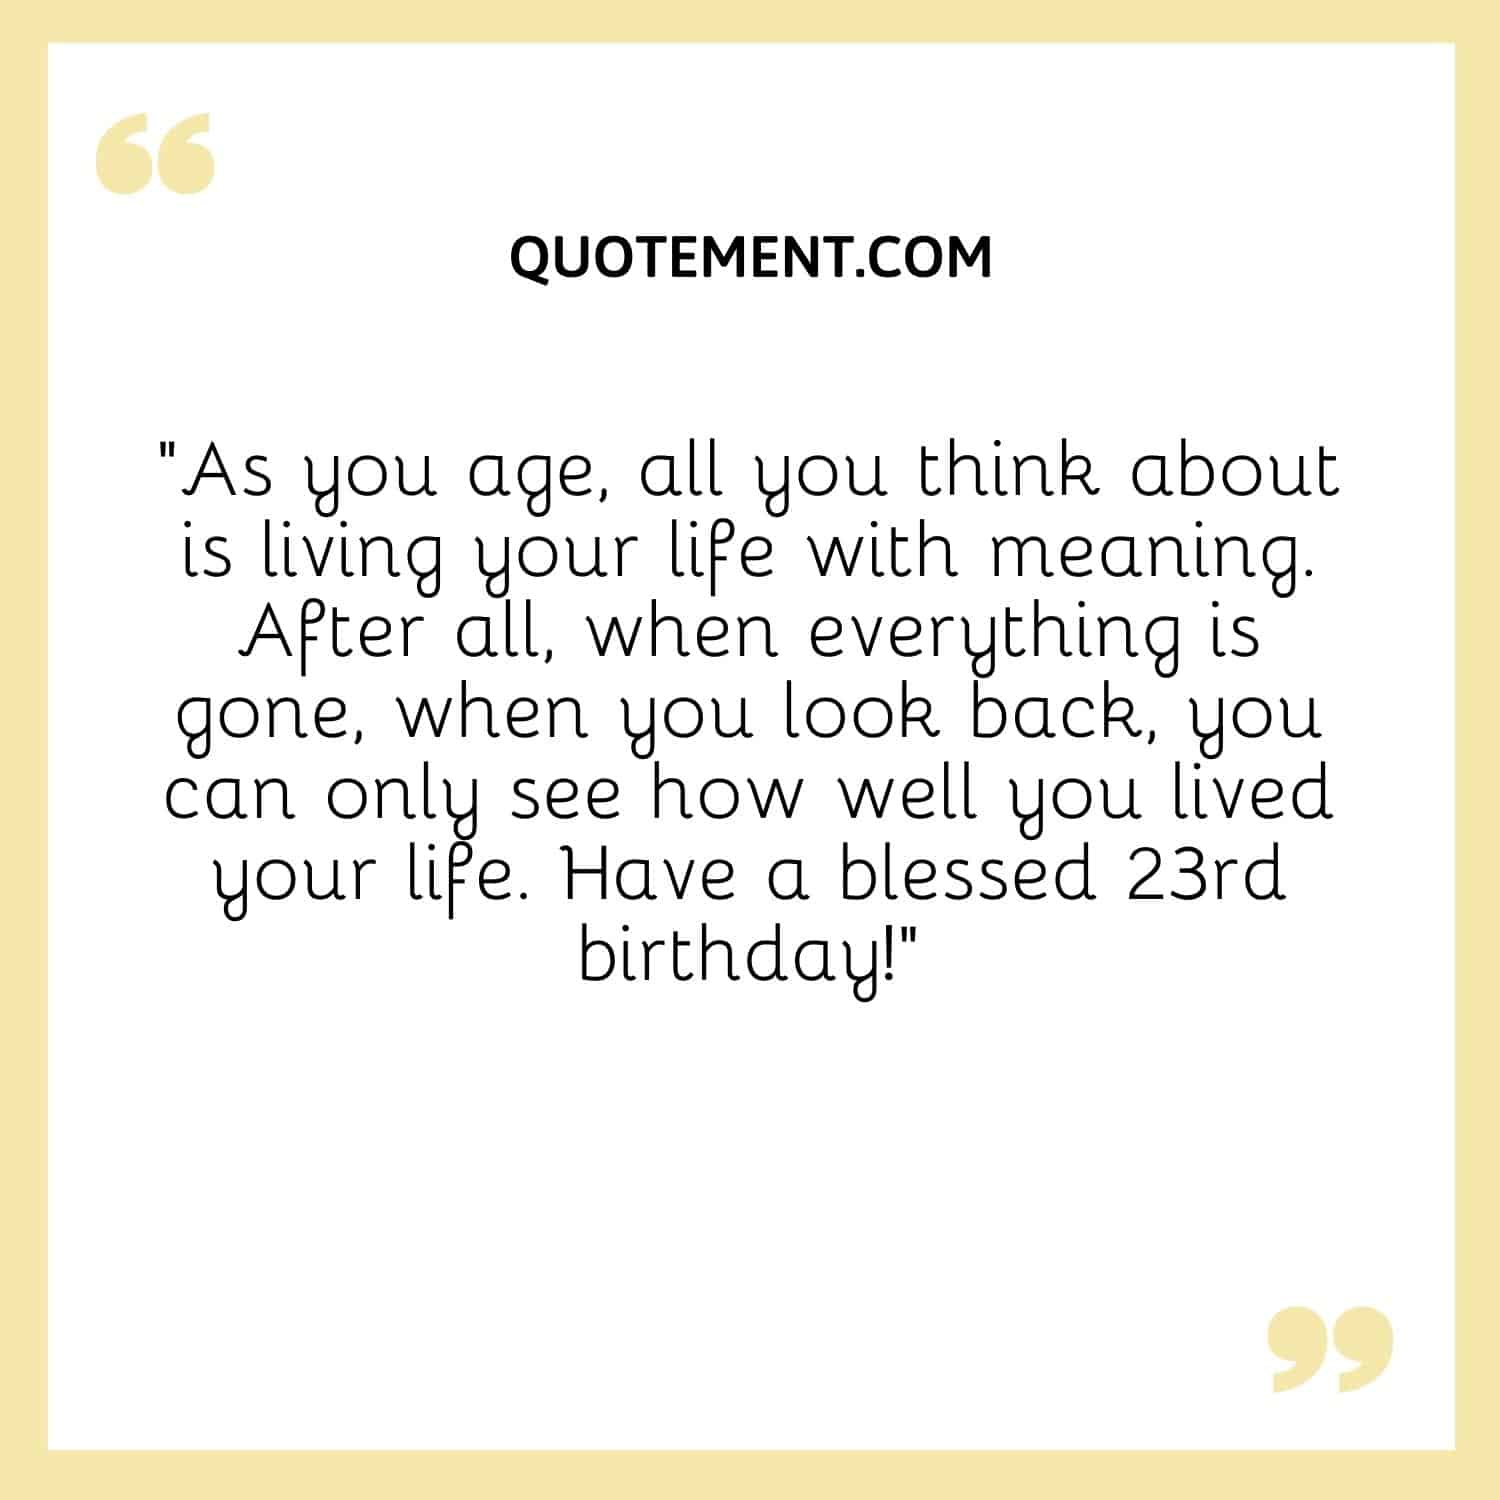 As you age, all you think about is living your life with meaning